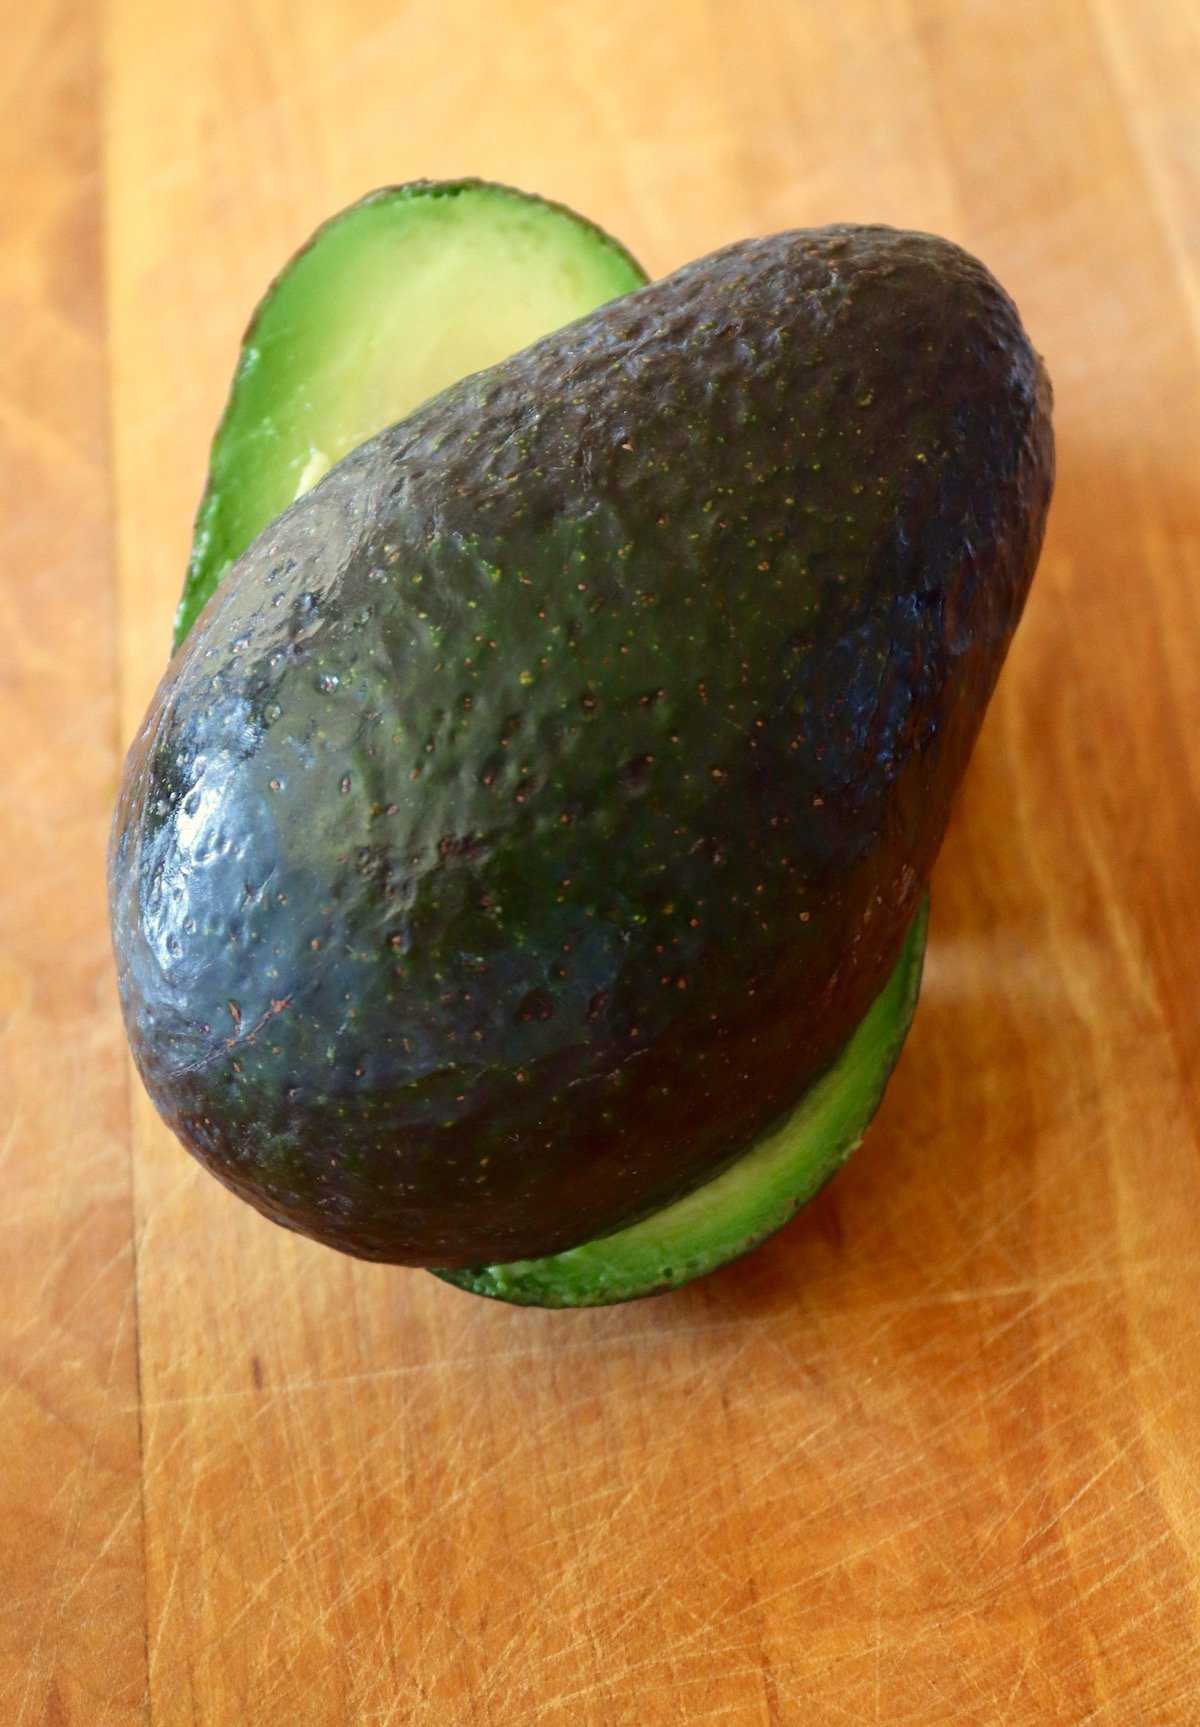 Two avocado halves slightly twisted open to show a bit of the inner green flesh.